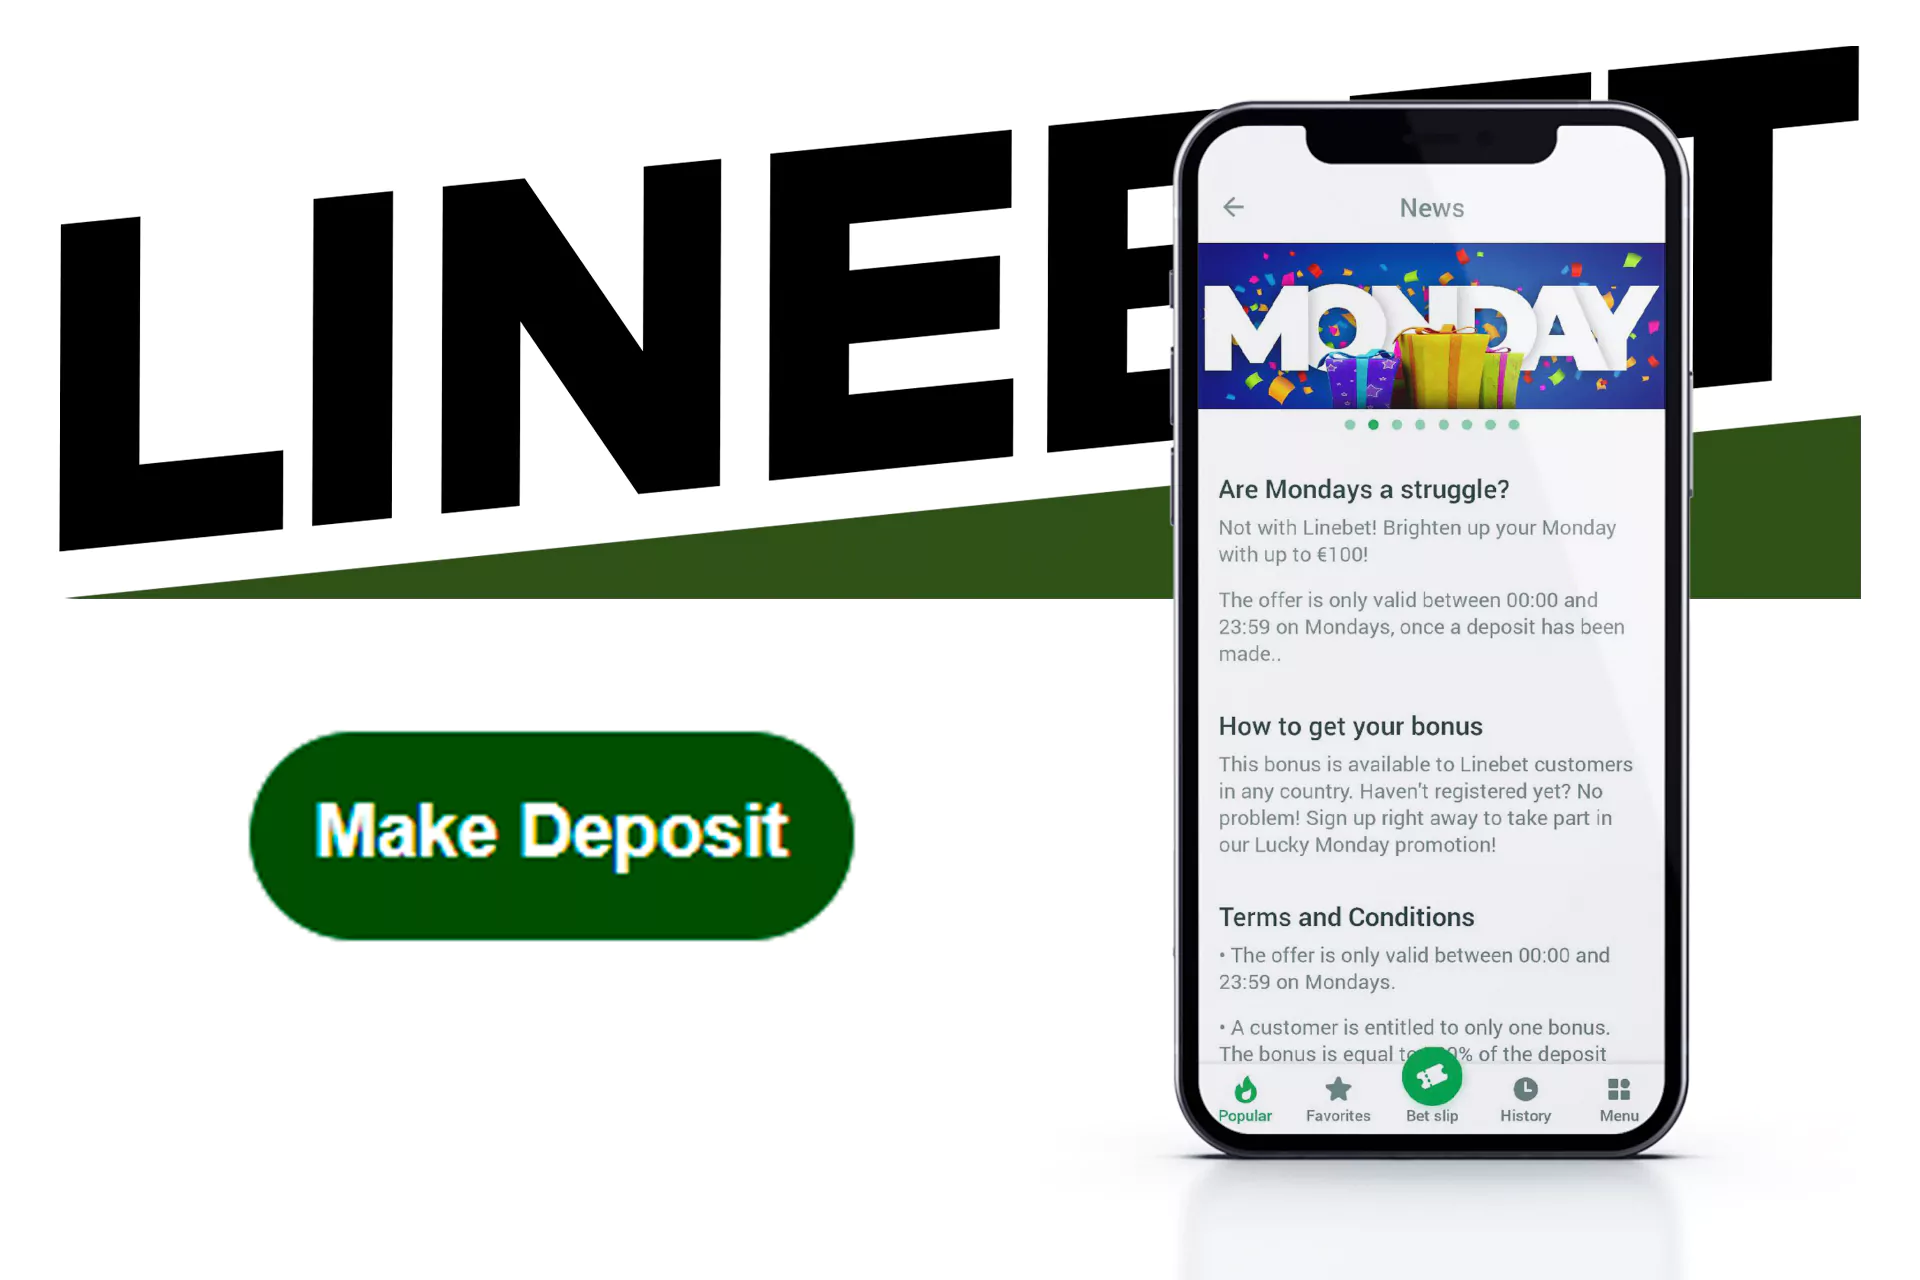 For receiving the Monday bonus you should make a deposit on this day.